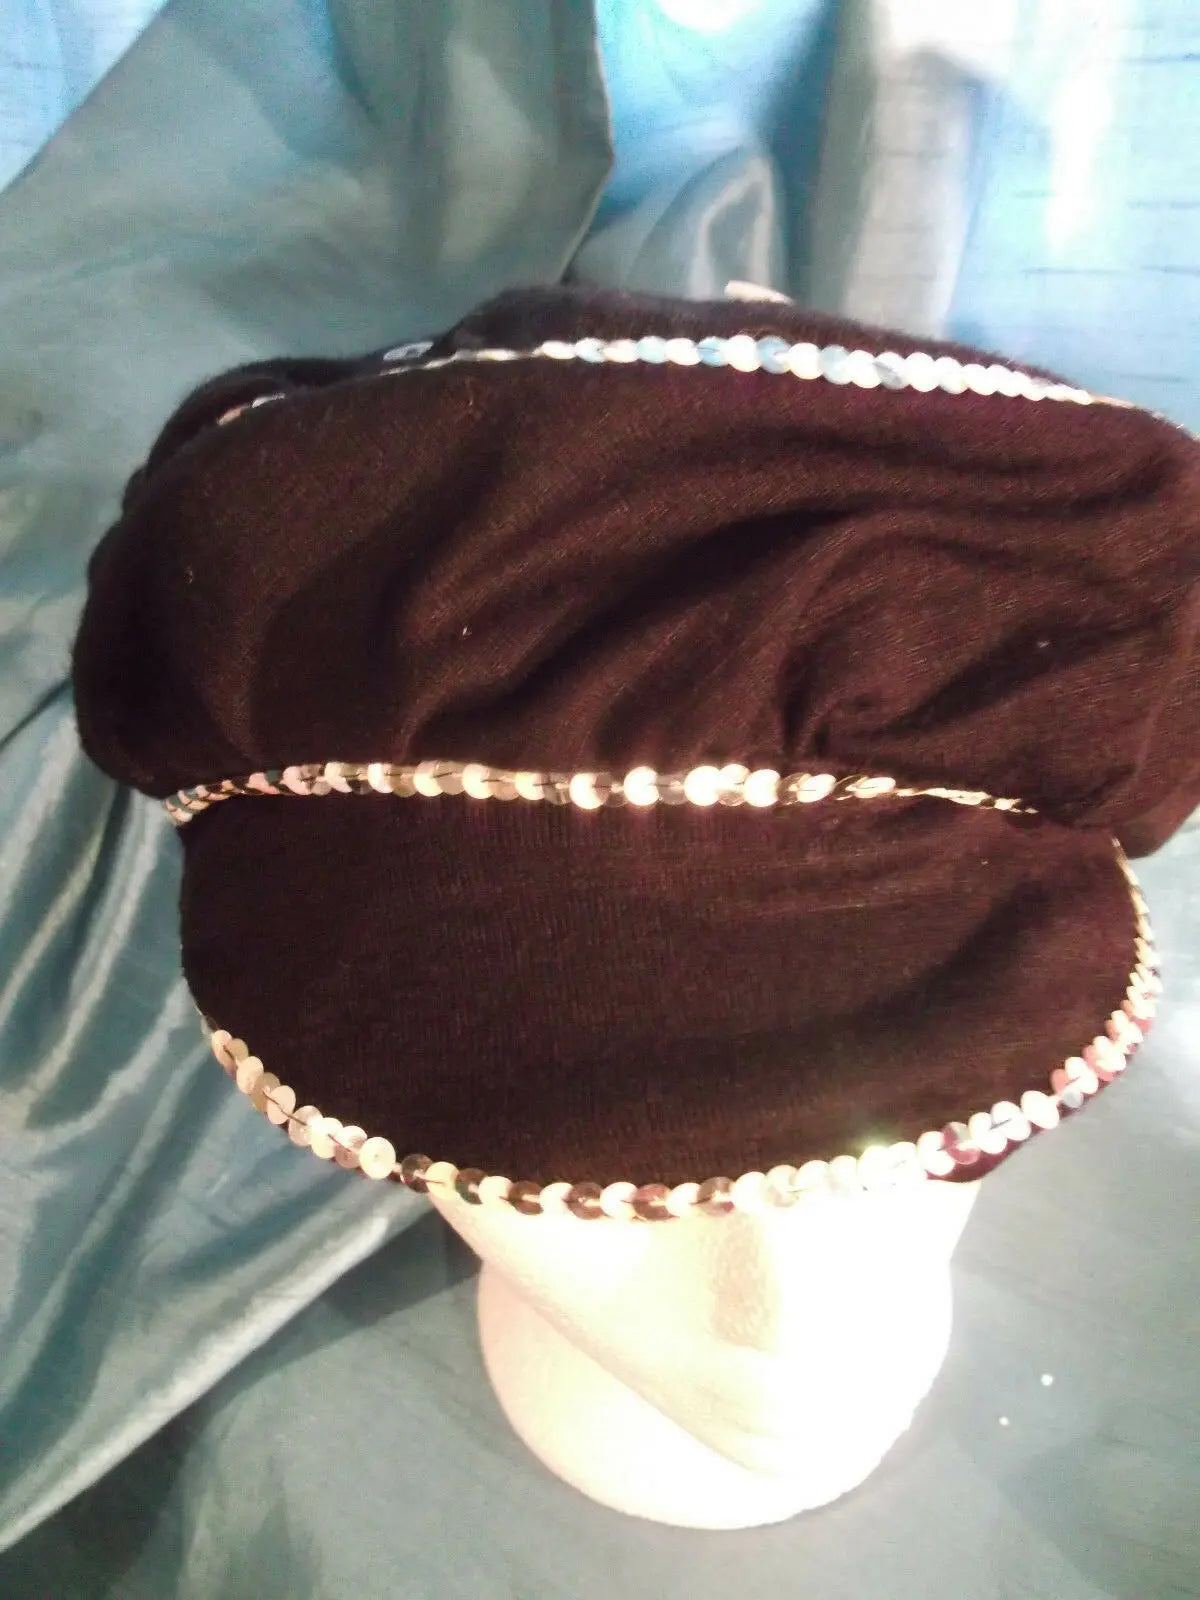 punk/cosplay/festi/stagewear/costume/KANGOL HAT WITH SEQUINS/BUTTONS 20"/52CM unbranded. vintage